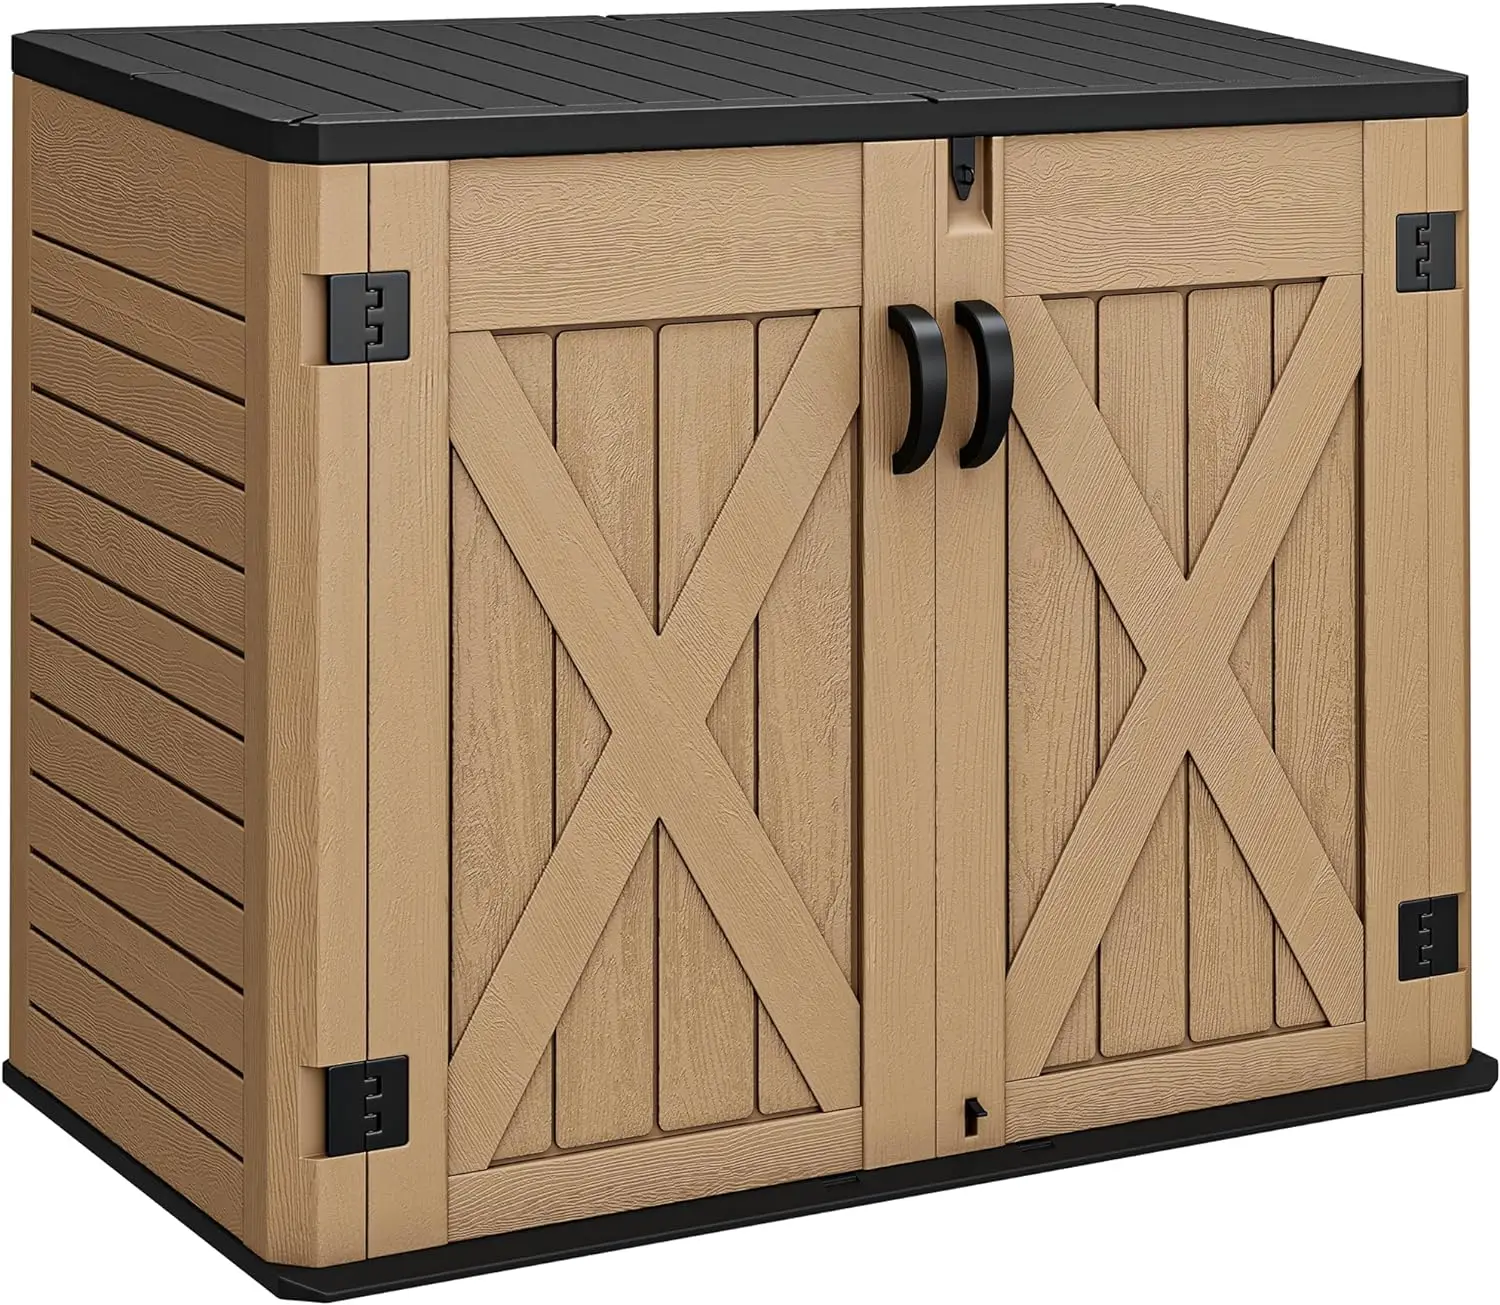 

Outdoor Horizontal Storage Shed with X-Shaped Lockable Door 35 Cu Ft Weather Resistant Resin Tool Shed w/o Shelf, Ideal for Bike